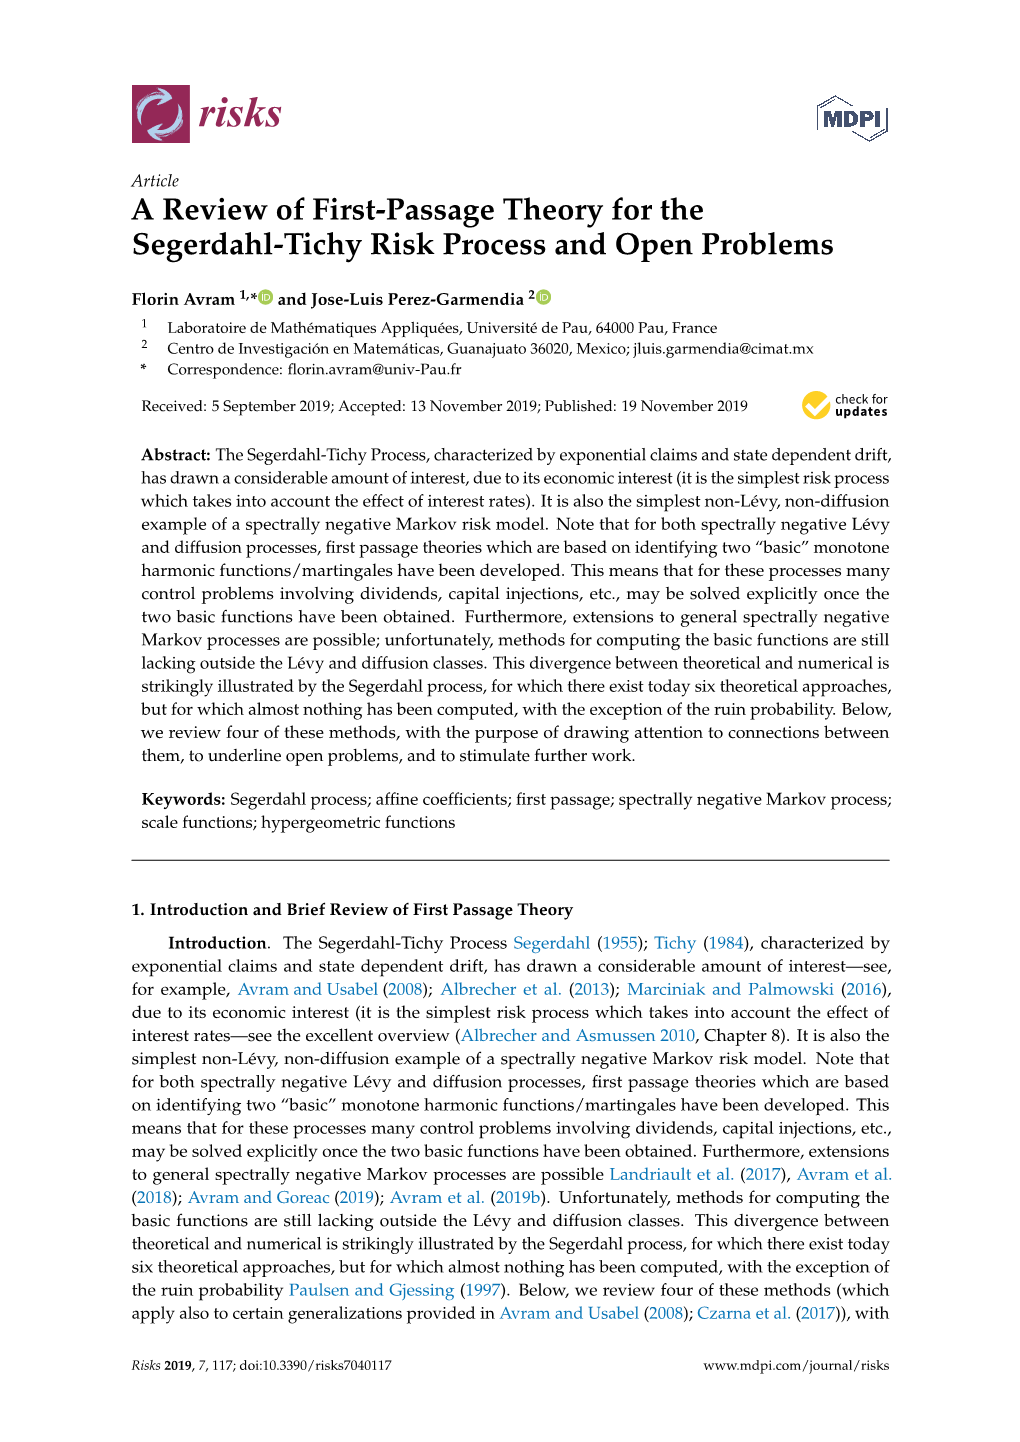 A Review of First-Passage Theory for the Segerdahl-Tichy Risk Process and Open Problems